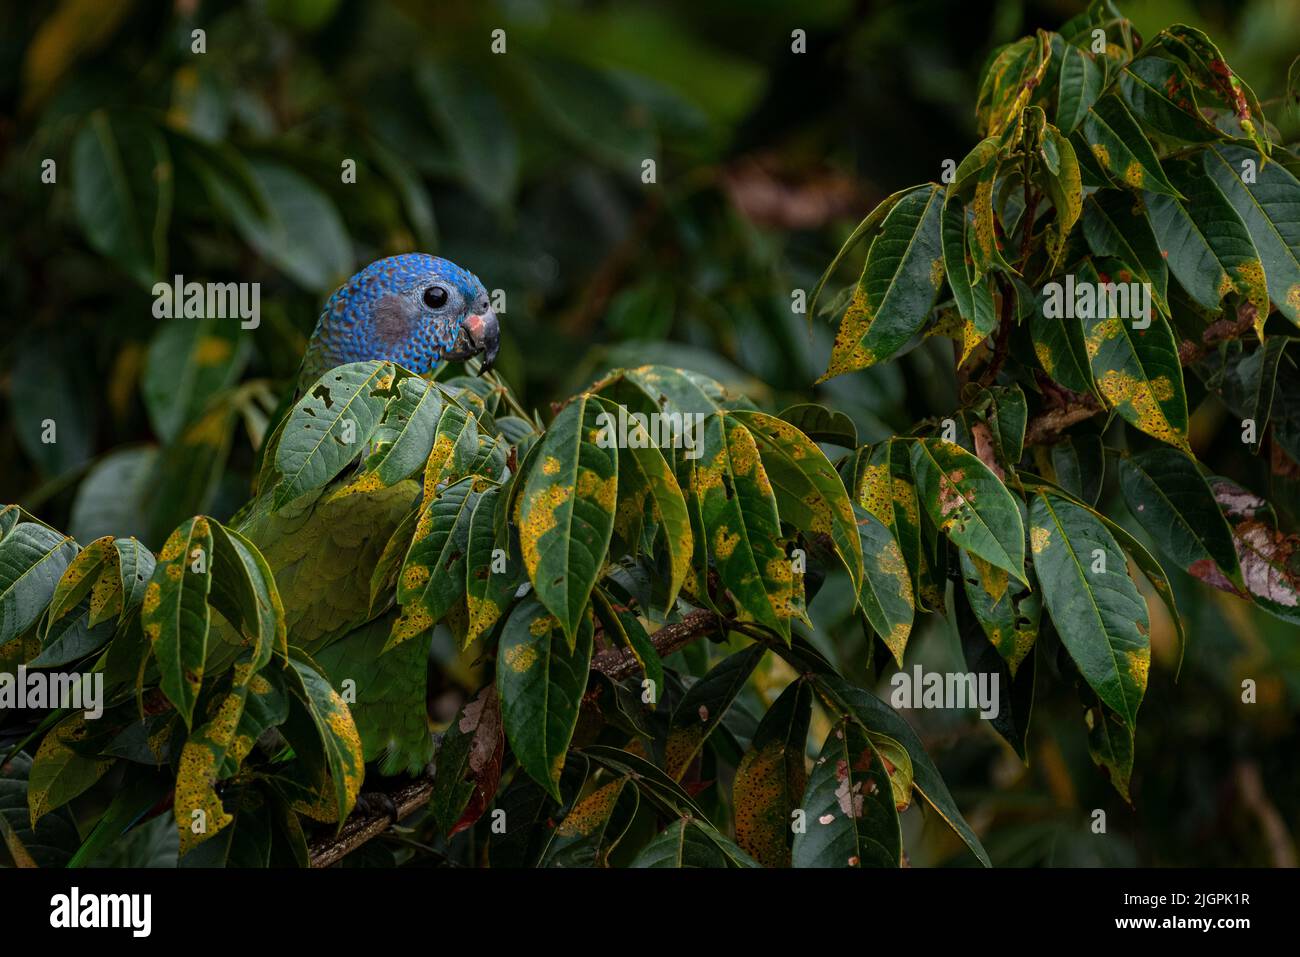 Blue headed parrot hiding in a tree in the rain forest just his head looks over the leaves. Stock Photo